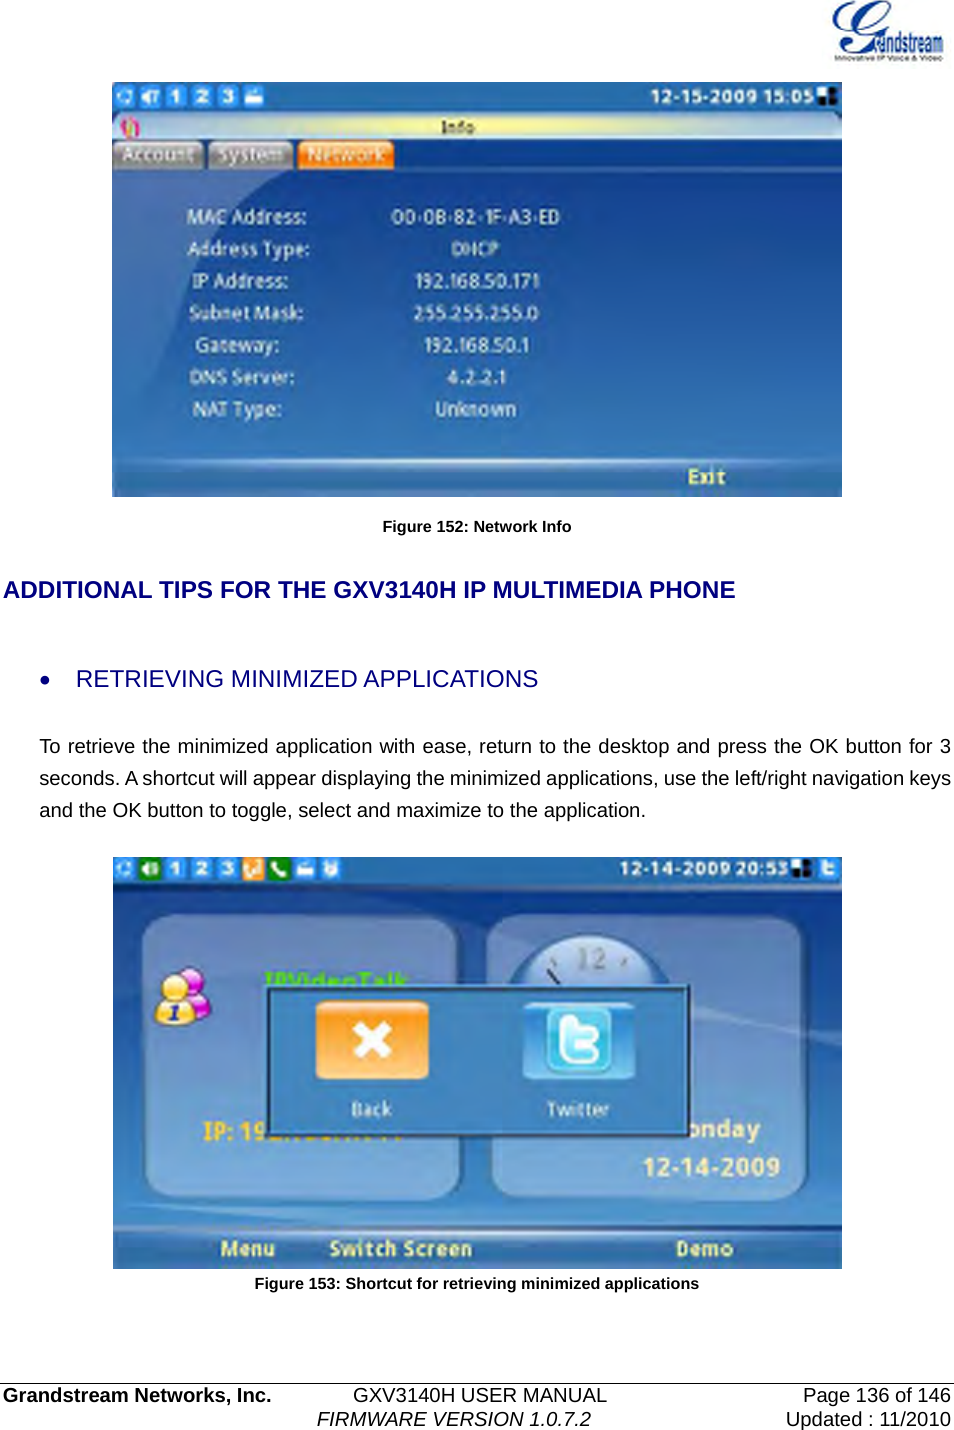   Grandstream Networks, Inc.        GXV3140H USER MANUAL                  Page 136 of 146                                FIRMWARE VERSION 1.0.7.2 Updated : 11/2010   Figure 152: Network Info  ADDITIONAL TIPS FOR THE GXV3140H IP MULTIMEDIA PHONE  • RETRIEVING MINIMIZED APPLICATIONS To retrieve the minimized application with ease, return to the desktop and press the OK button for 3 seconds. A shortcut will appear displaying the minimized applications, use the left/right navigation keys and the OK button to toggle, select and maximize to the application.     Figure 153: Shortcut for retrieving minimized applications  